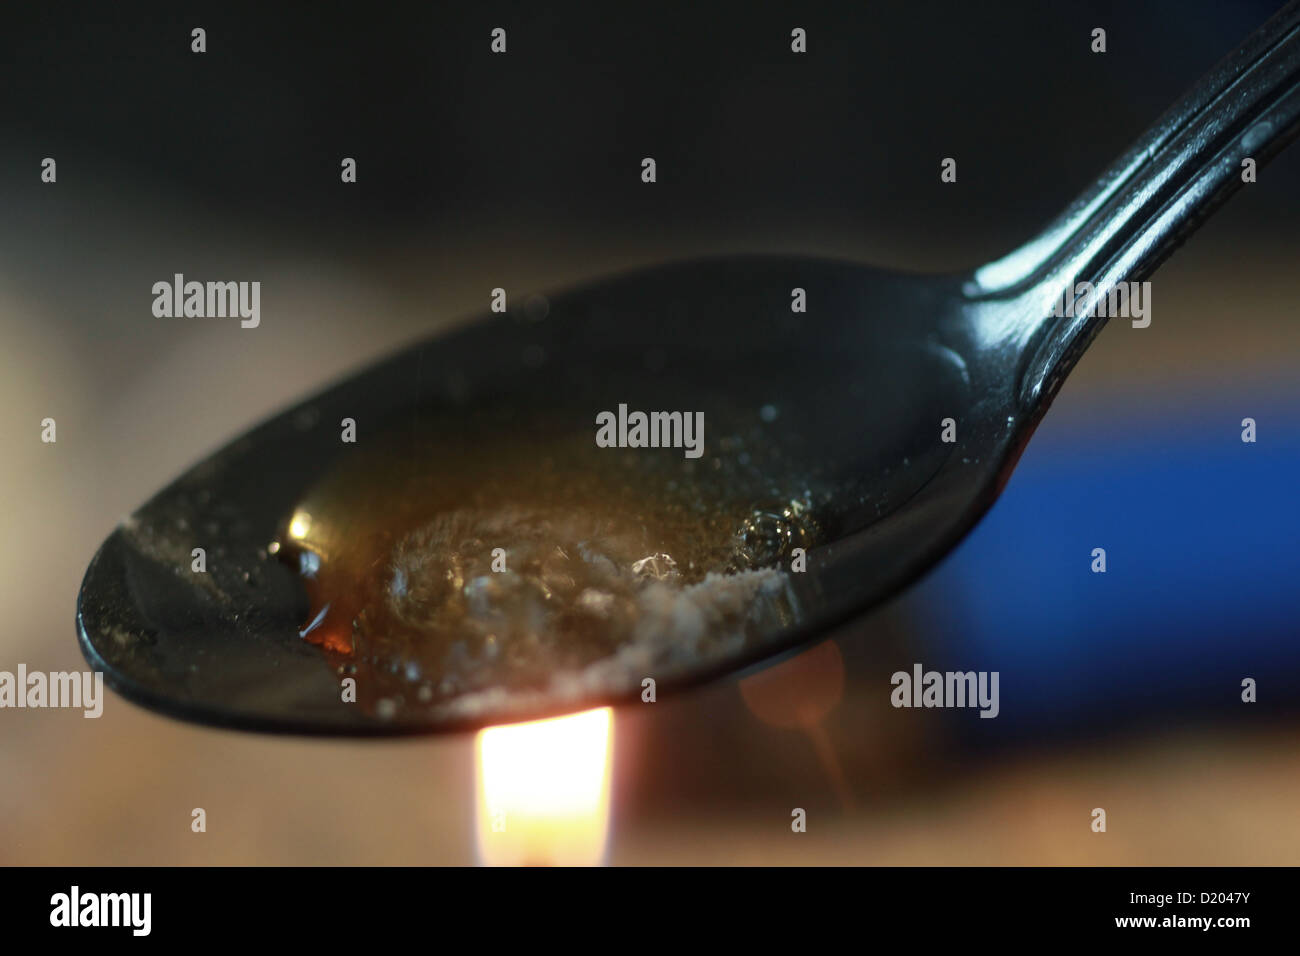 Cooking heroin on spoon over flame Stock Photo